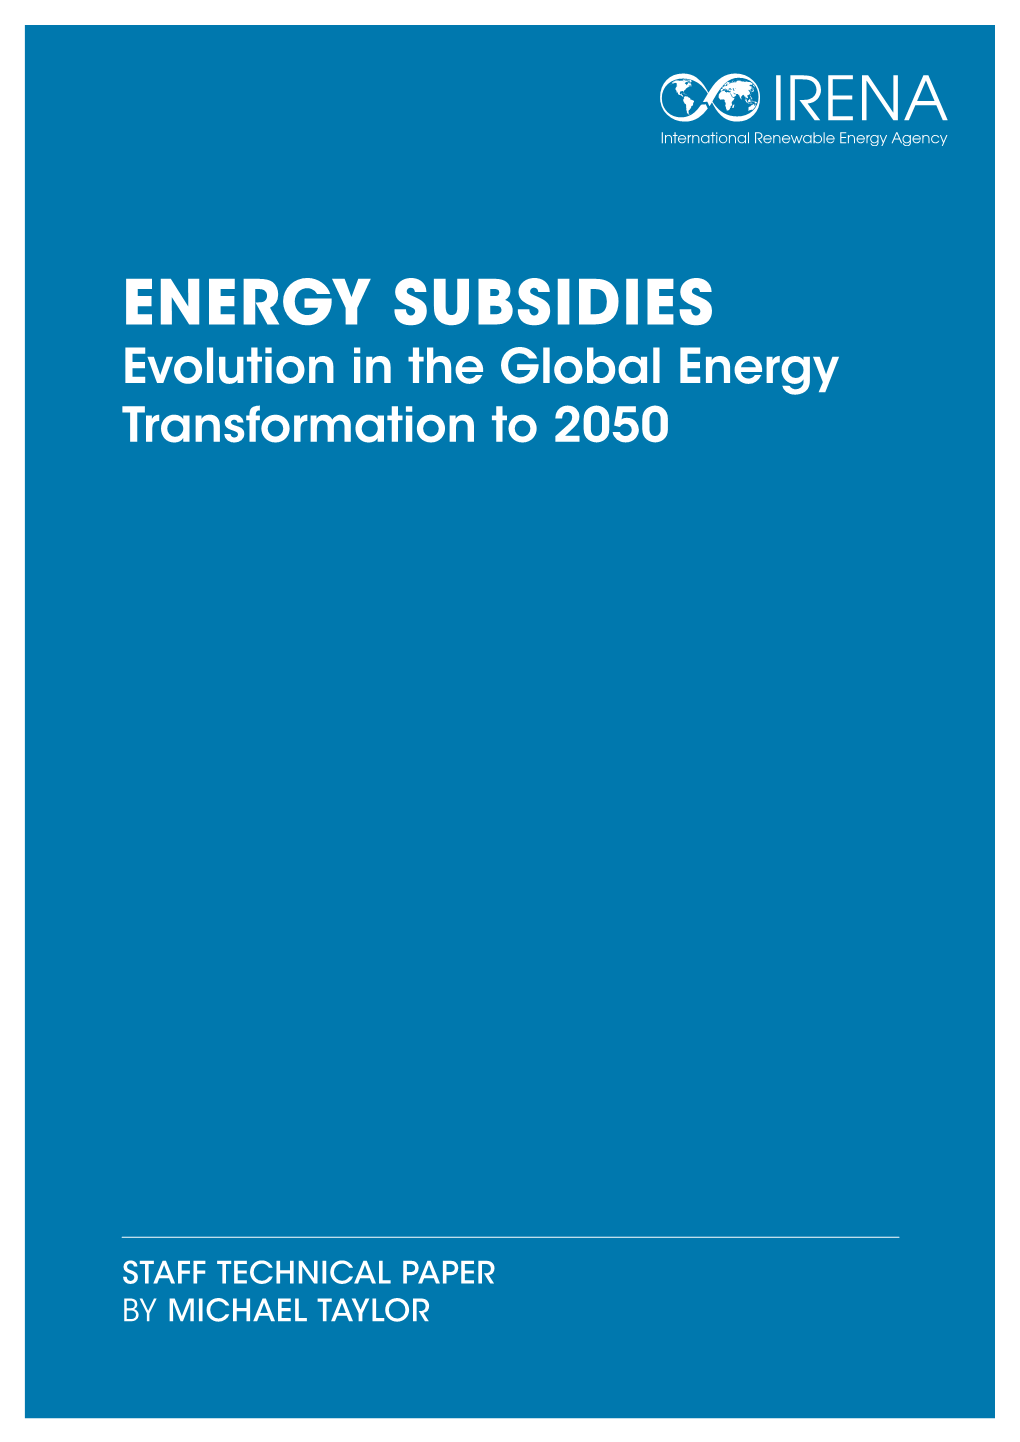 ENERGY SUBSIDIES Evolution in the Global Energy Transformation to 2050